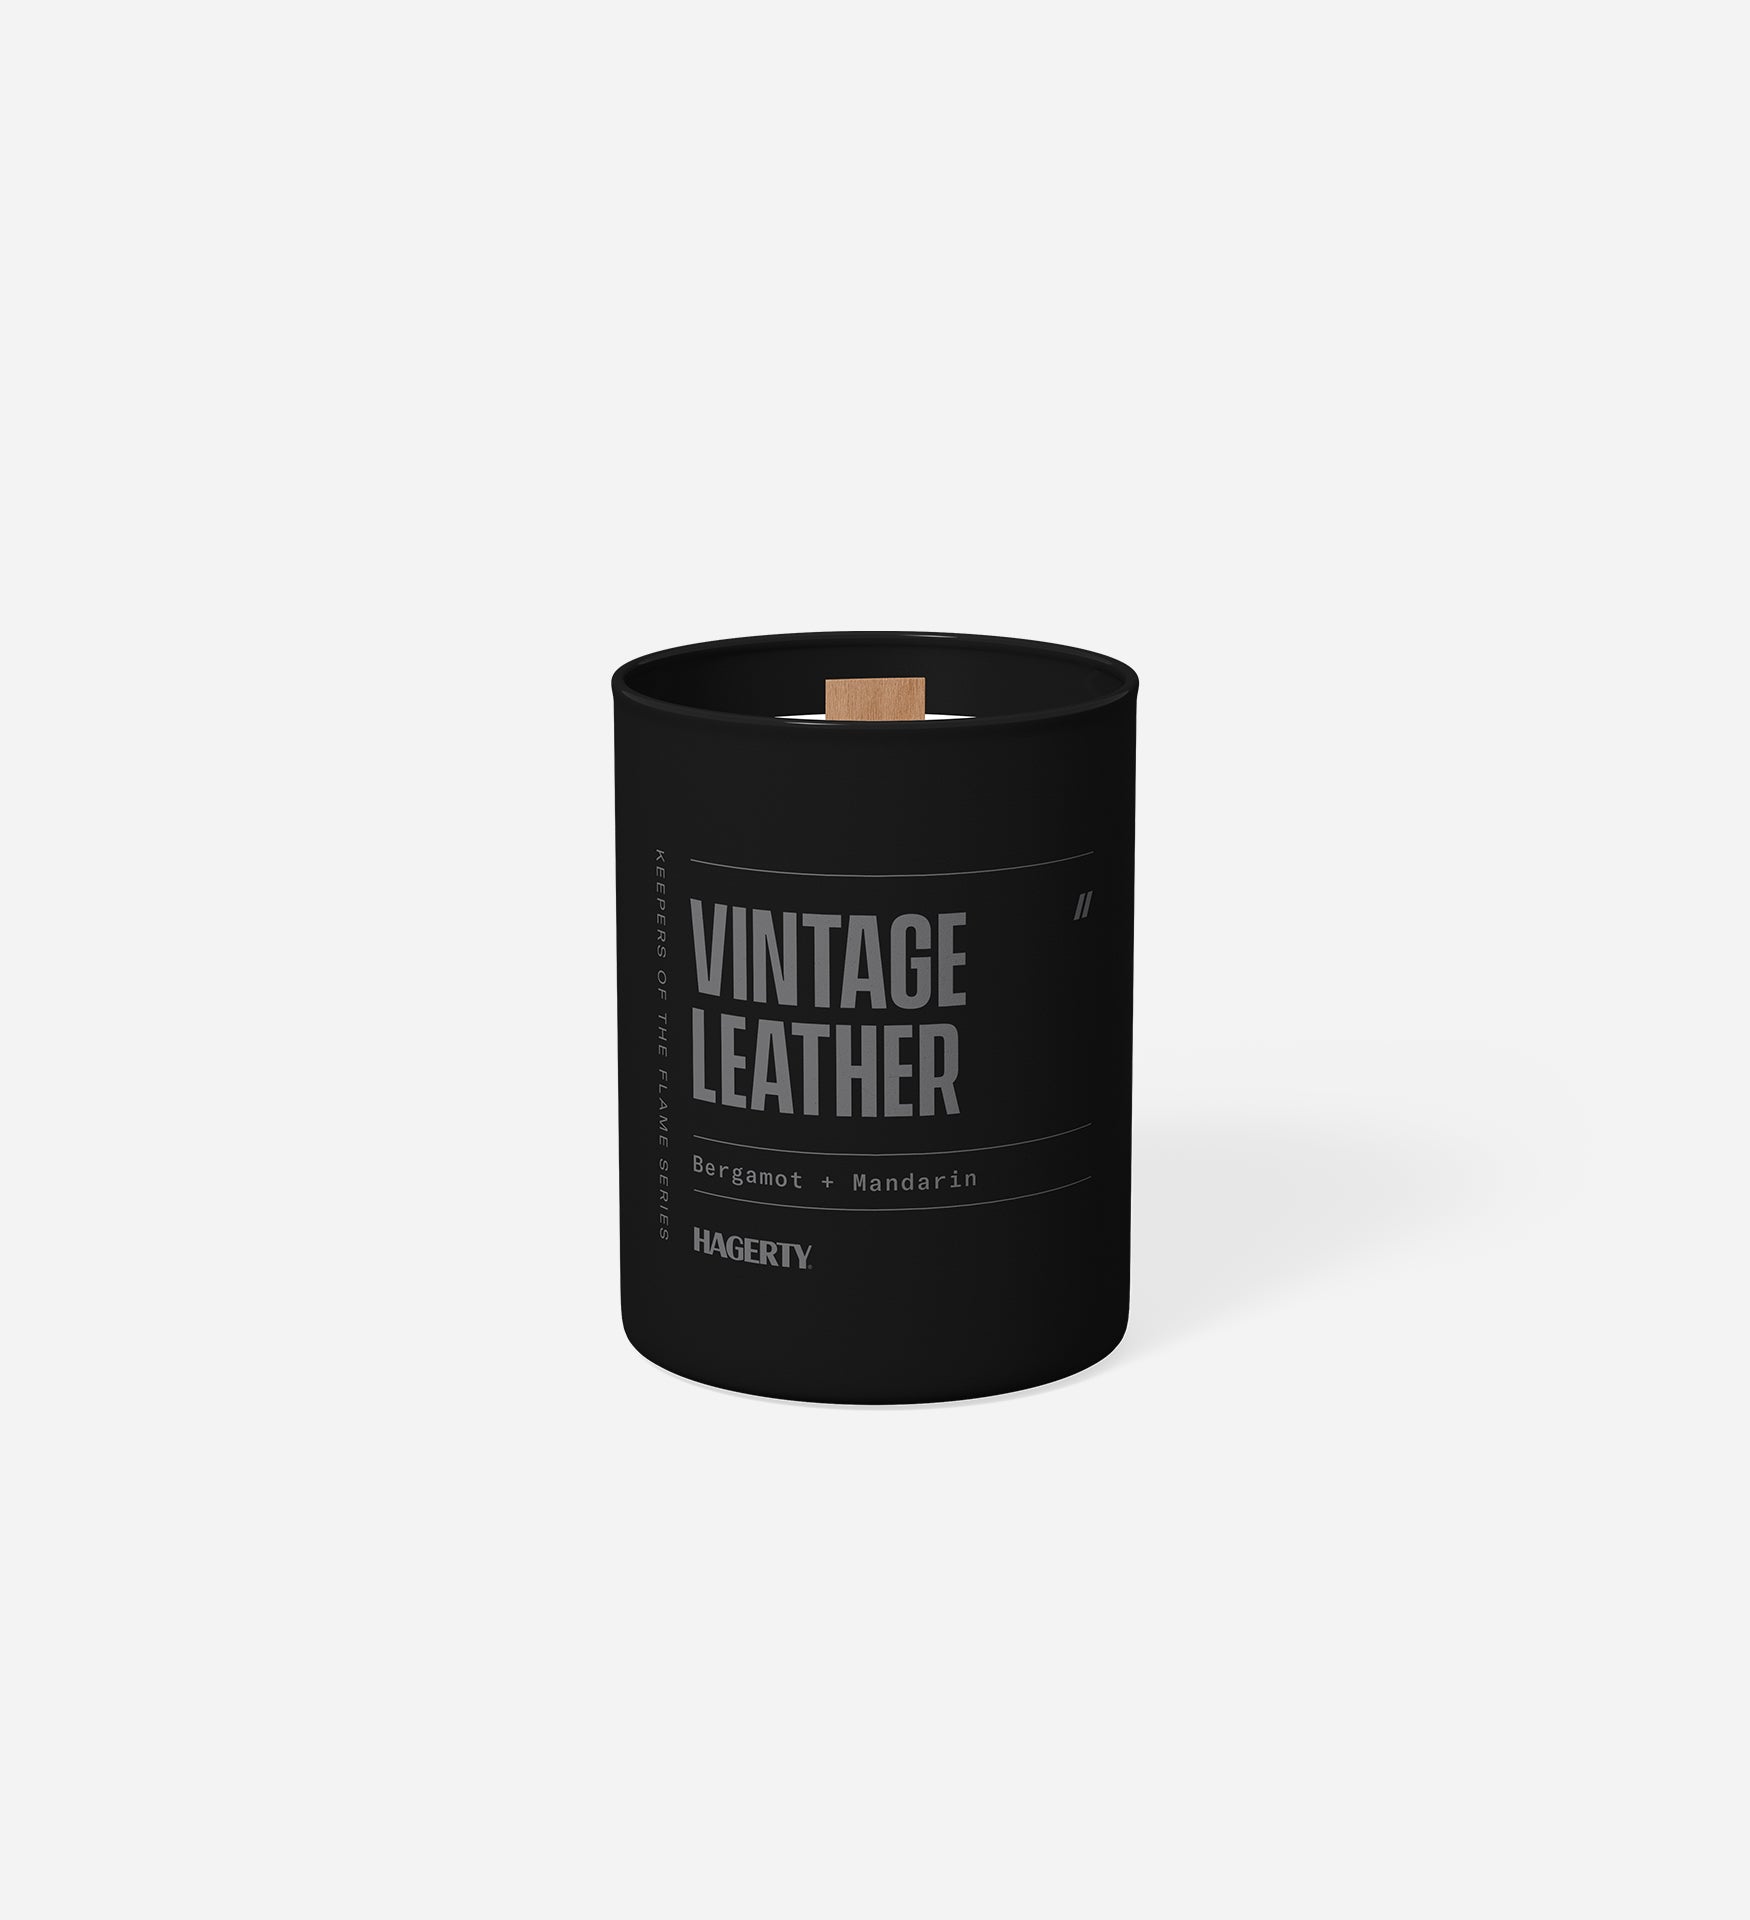 40th Anniversary Vintage Leather Candle